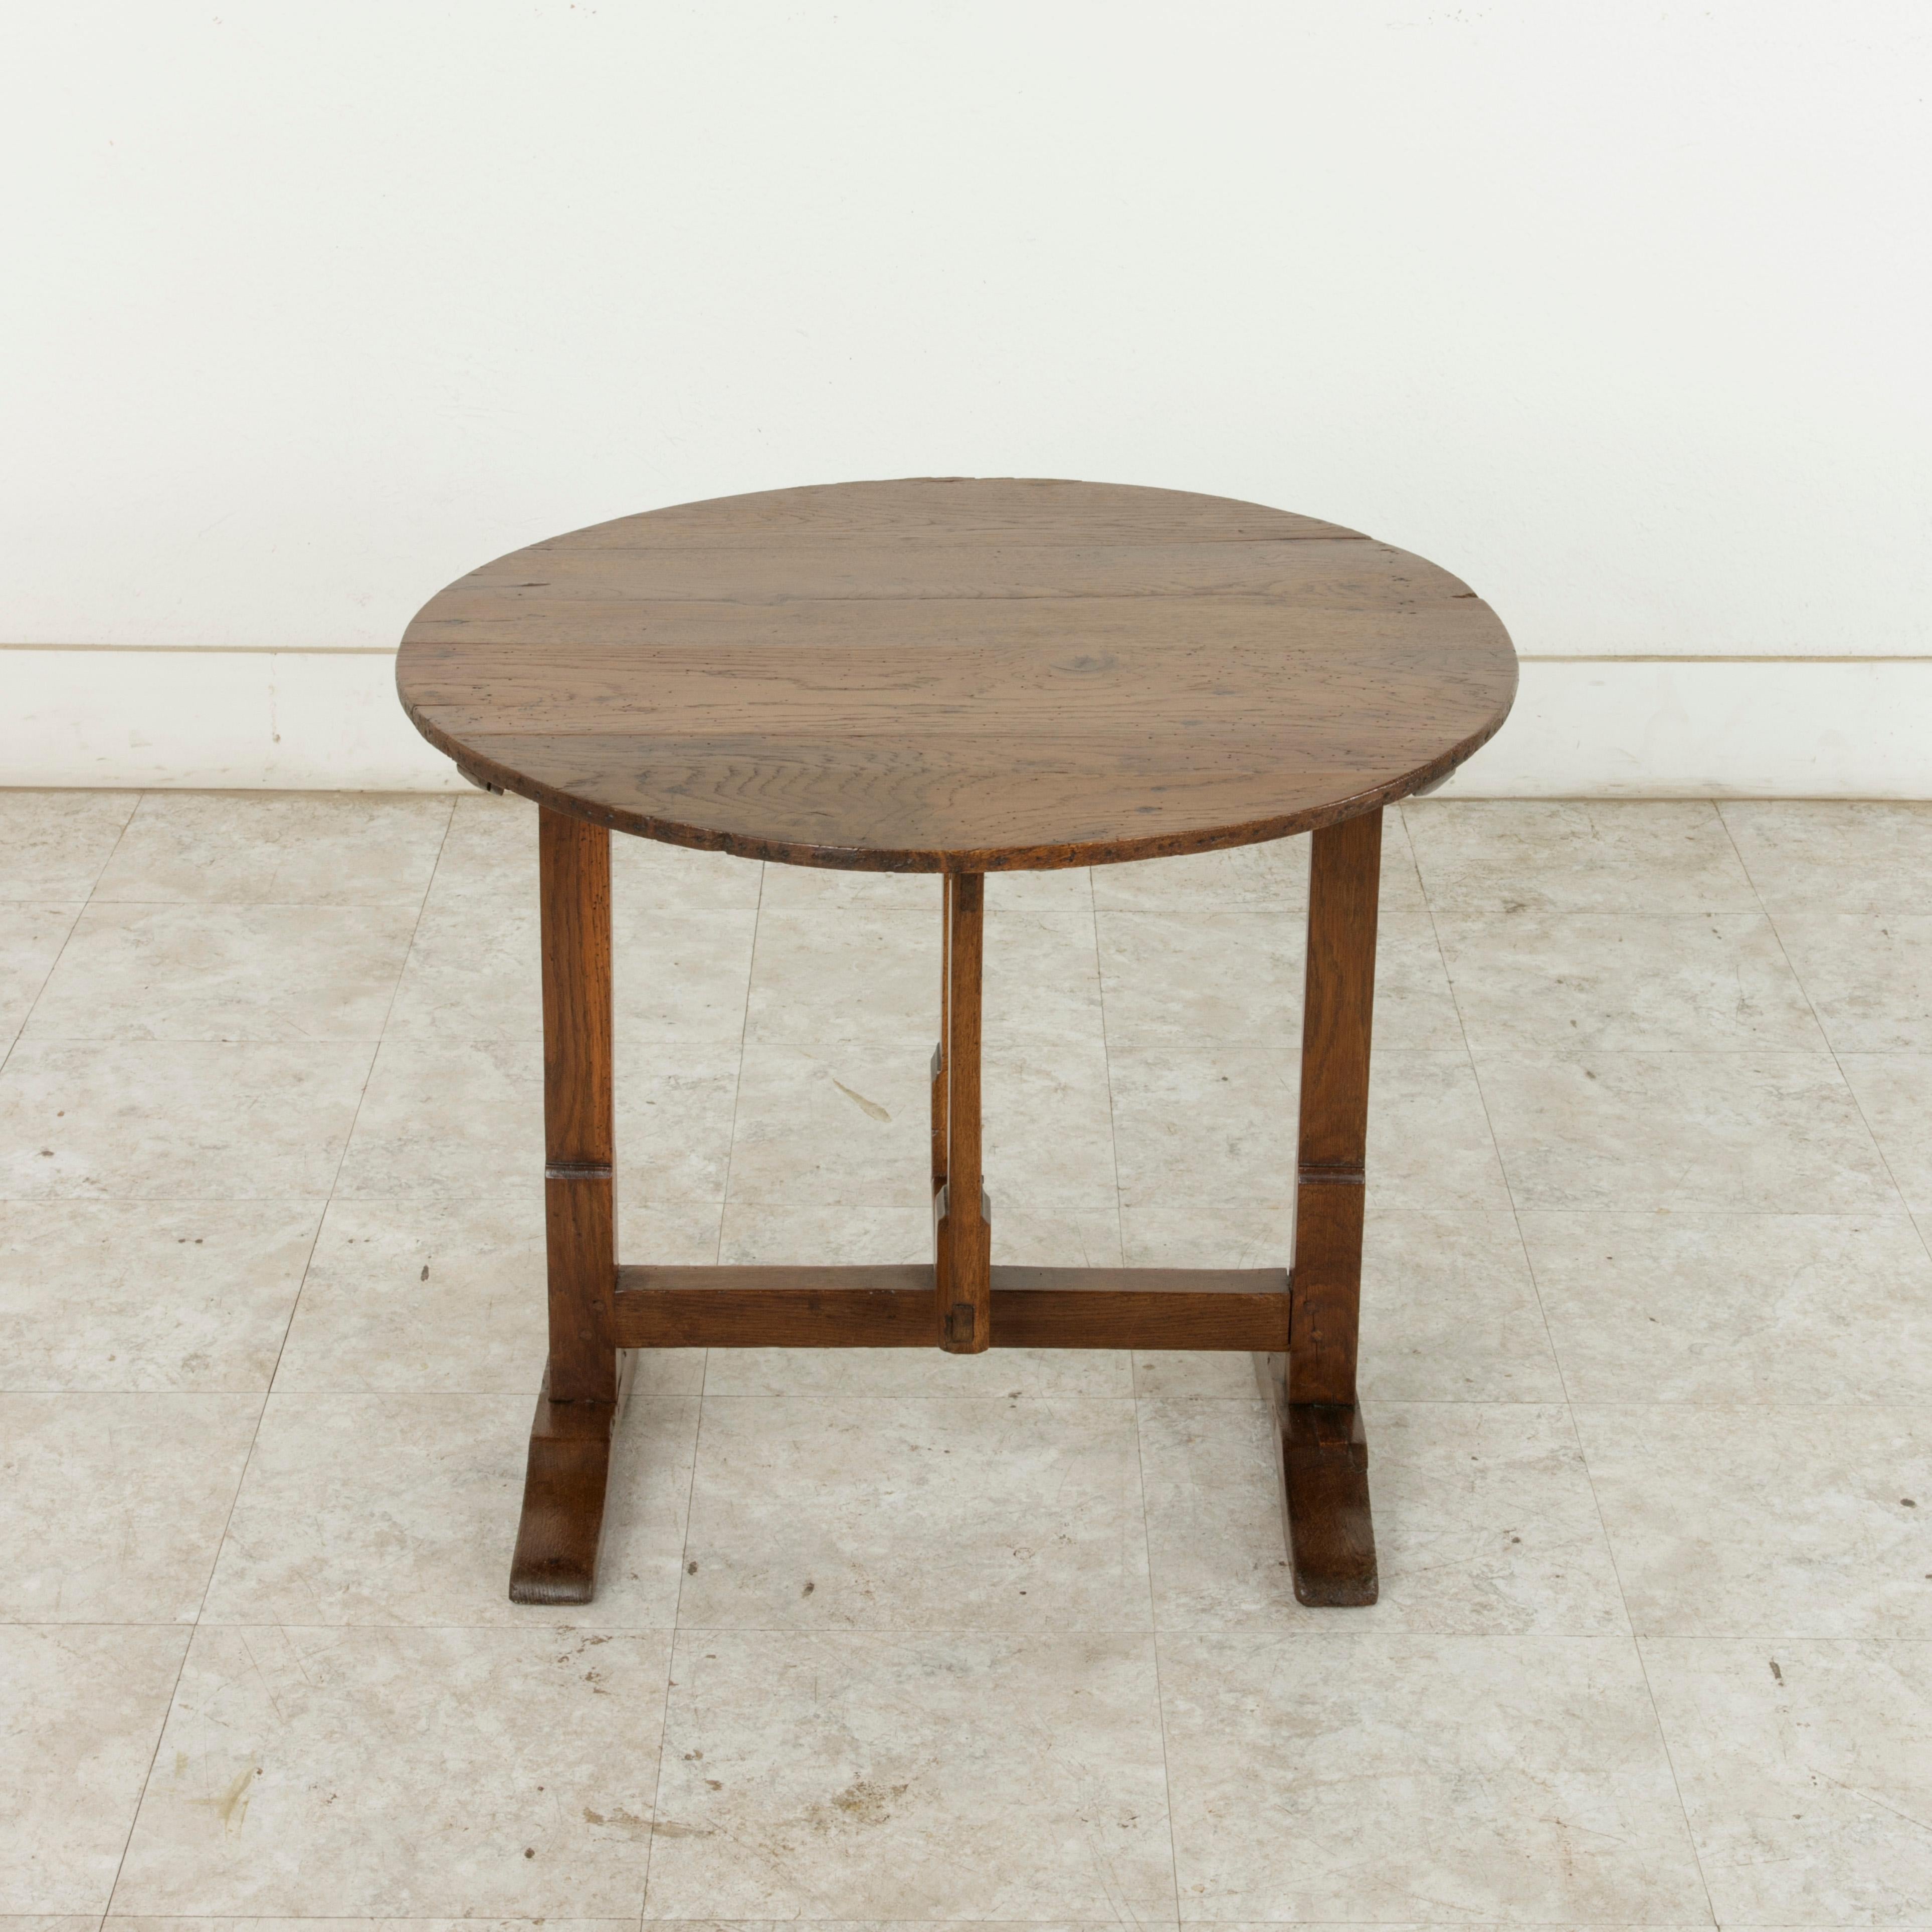 A perfect piece to finish a wine cellar or bar area, this small scale hand pegged oak vineyard table was originally used for wine tasting in the wine cellar of a vintner or for carrying out to the vineyards for the grape pickers to eat lunch.